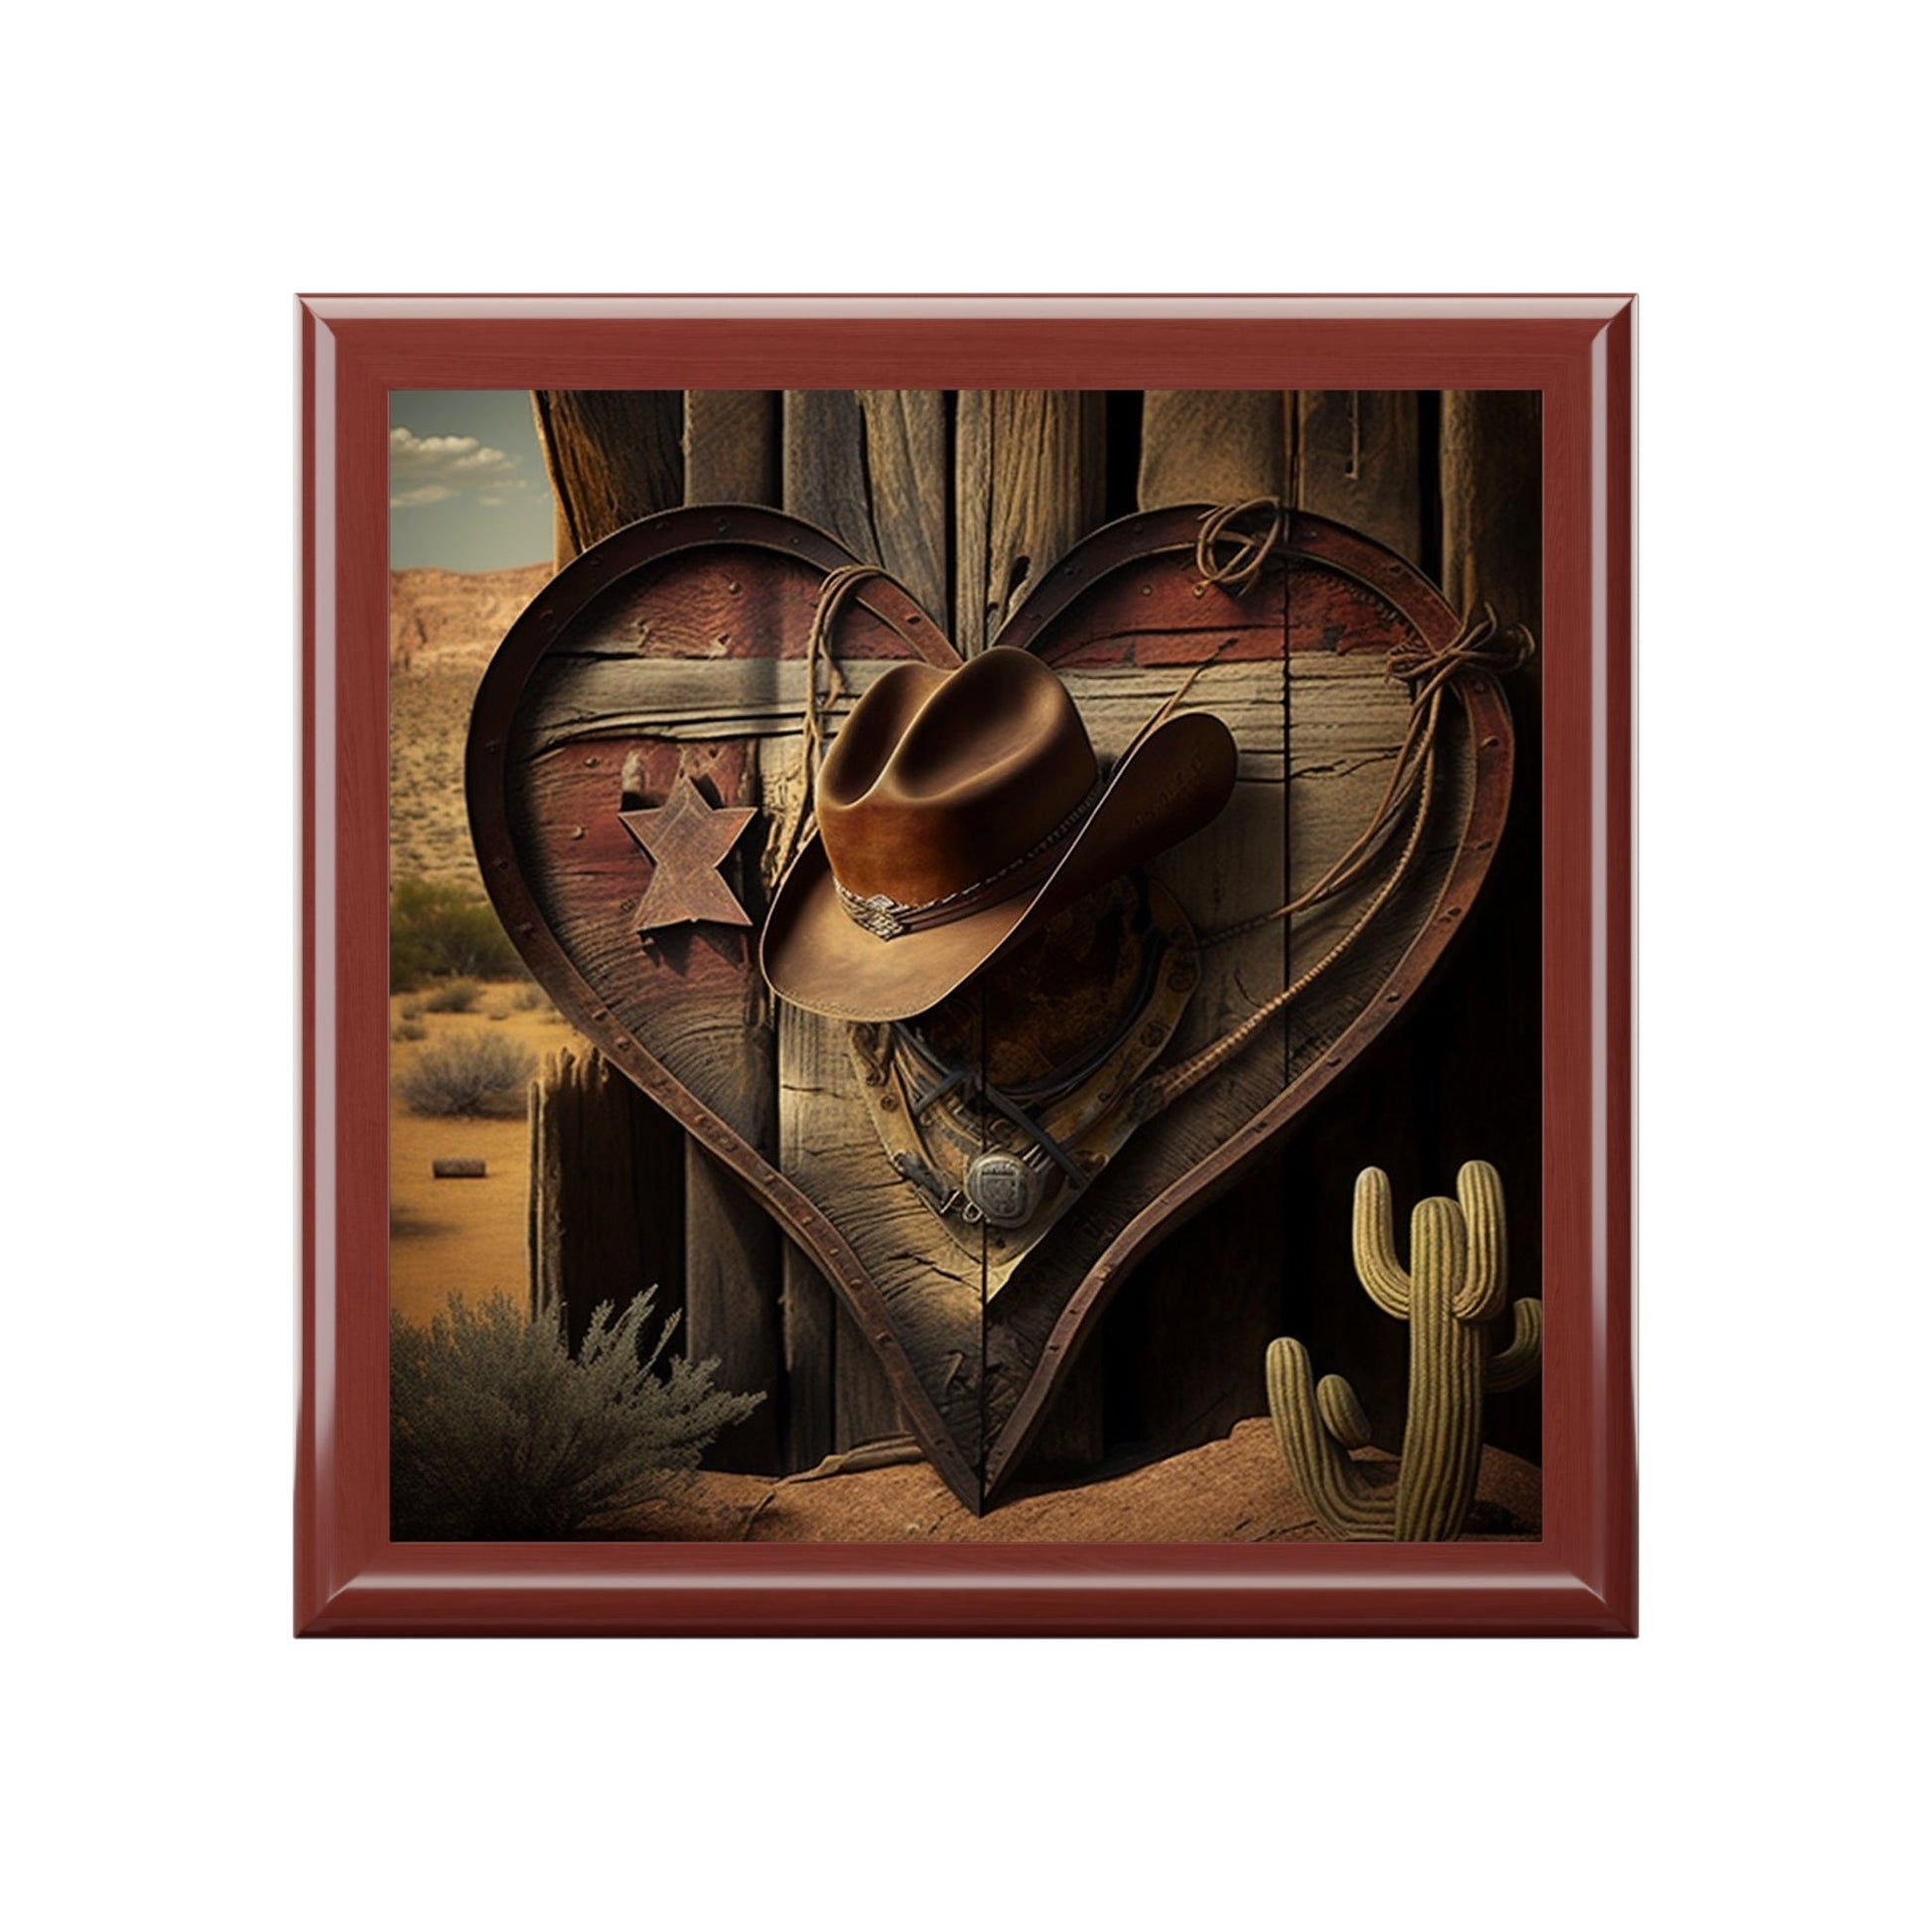 Cowboy Western Heart Wood Keepsake Jewelry Box with Ceramic Tile Cover